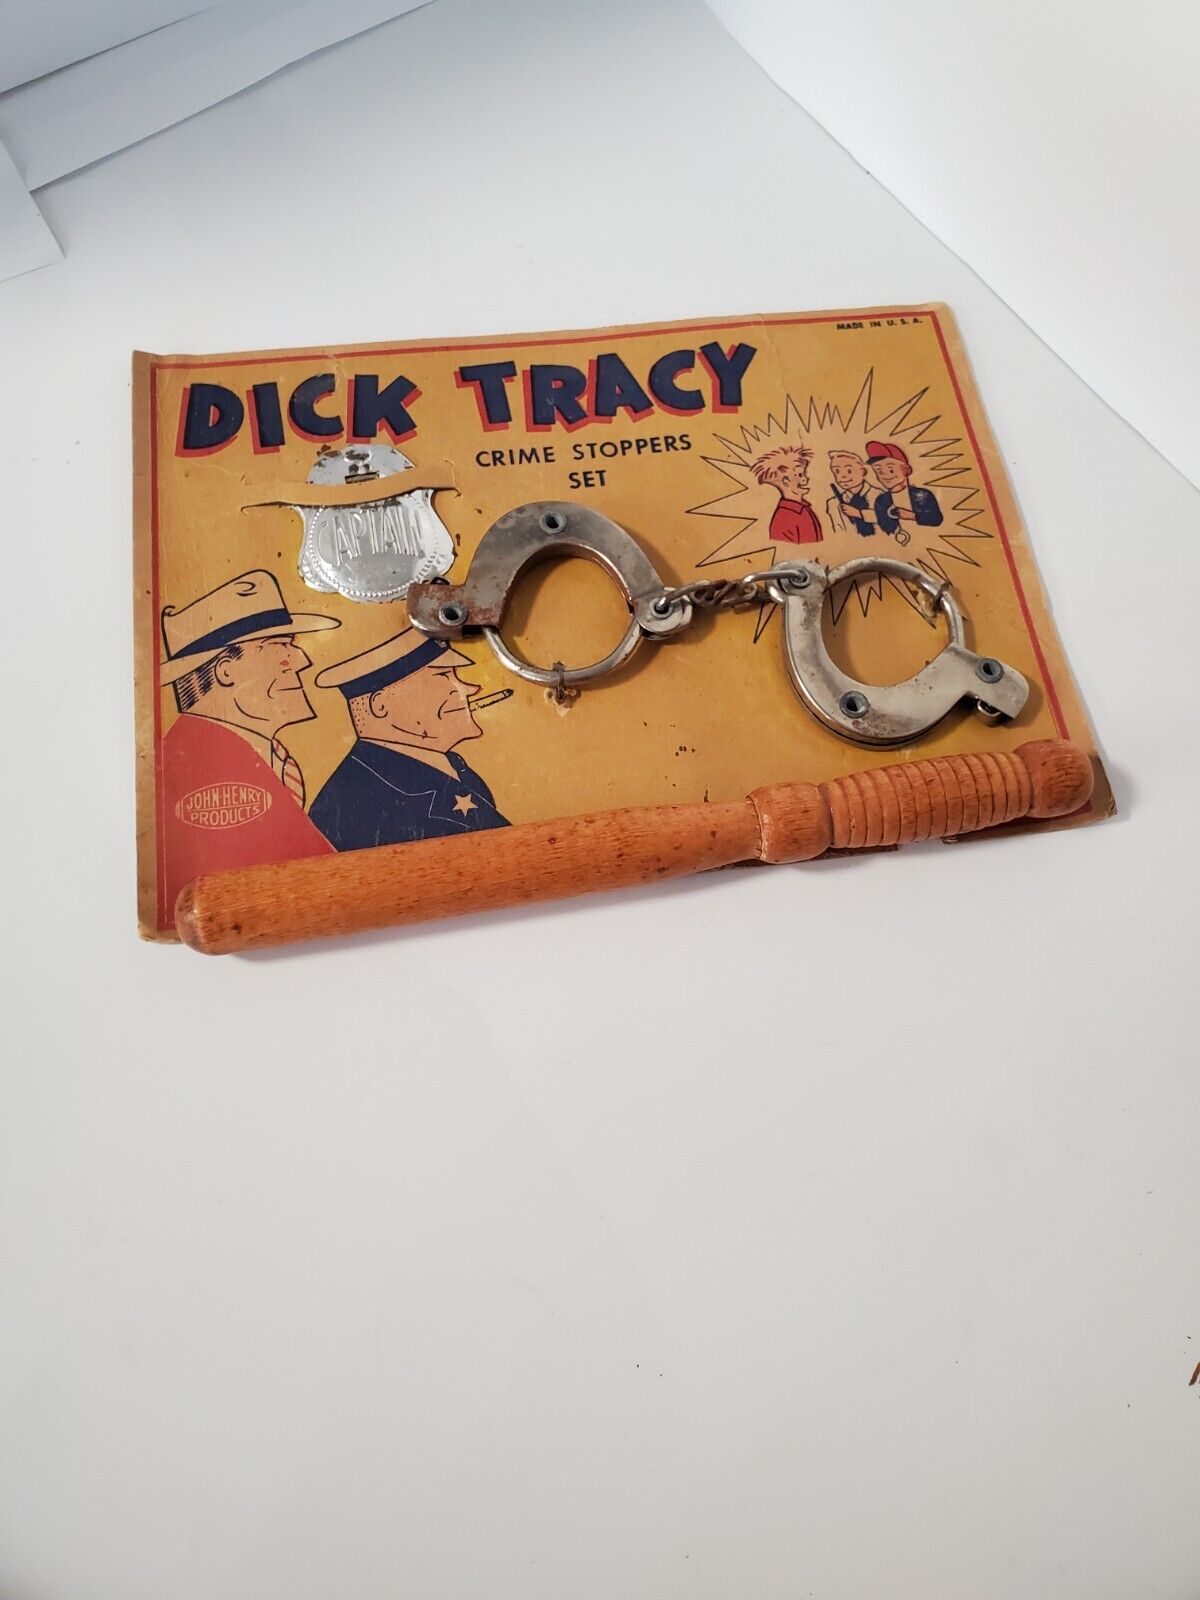 Antique  1930s Dick Tracy crime stopper set